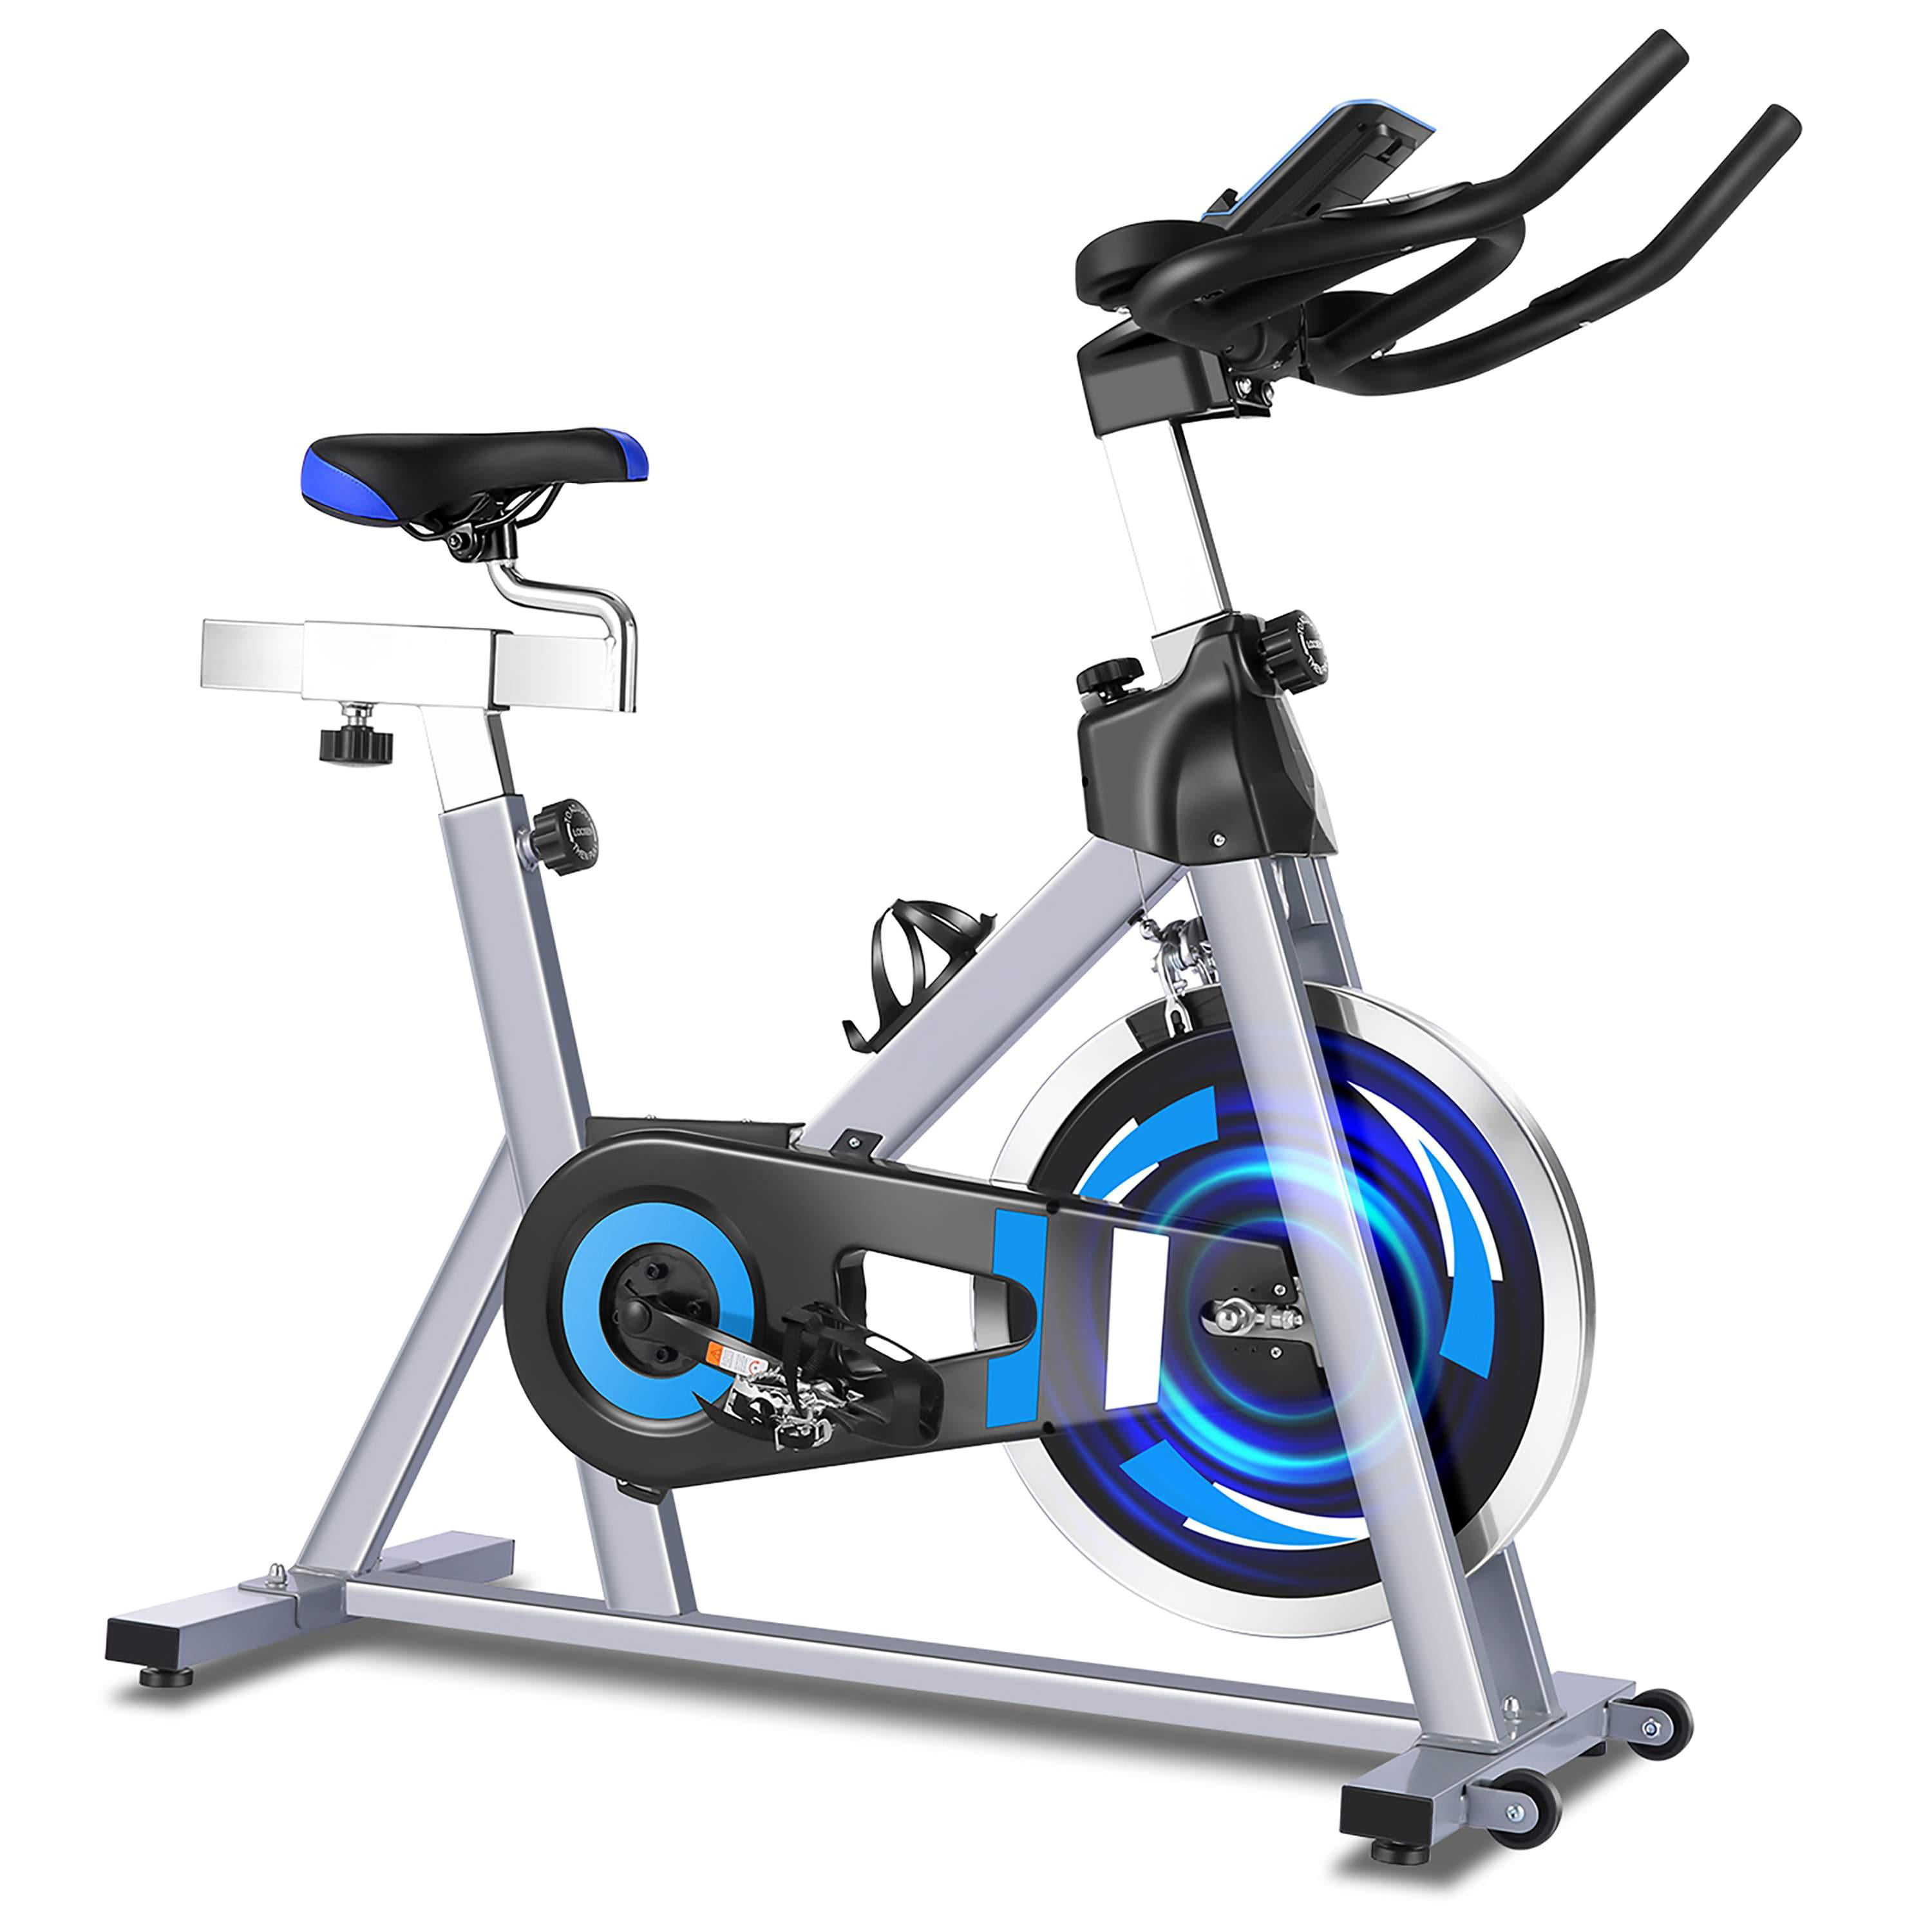 Details about   HEKA Exercise Bike Bicycle LCD Stationary Cycling Home Gym Fitness Indoor Cardio 